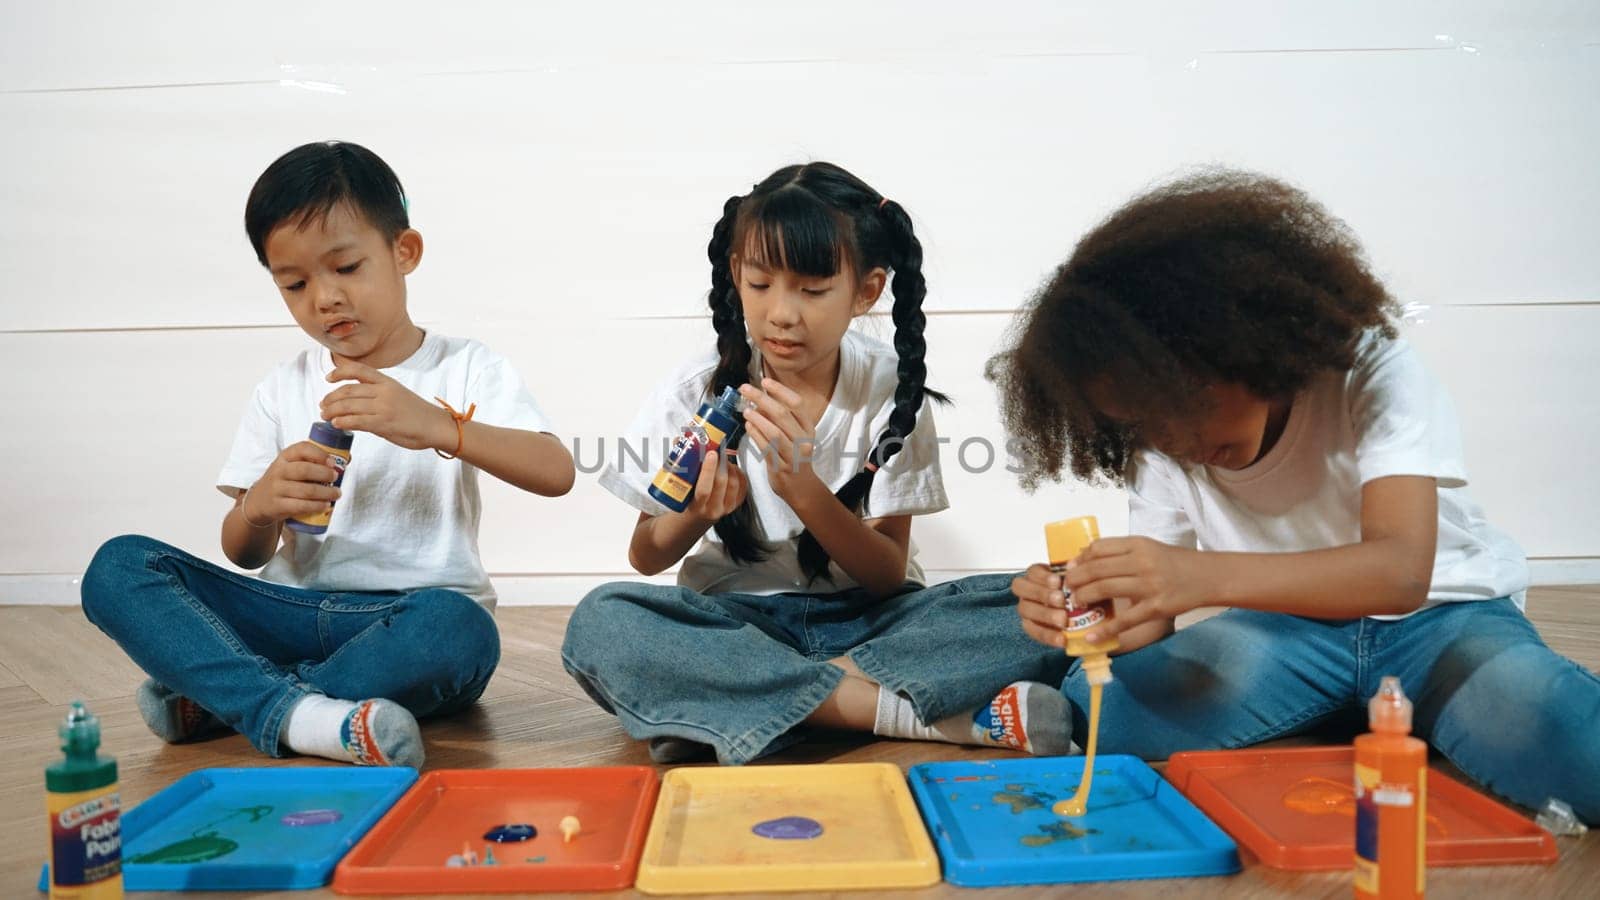 Group of diverse young student mixing color while sitting together. Happy multicultural children prepared mixed to playing and creating new artwork at art lesson. Creative activity concept. Erudition.